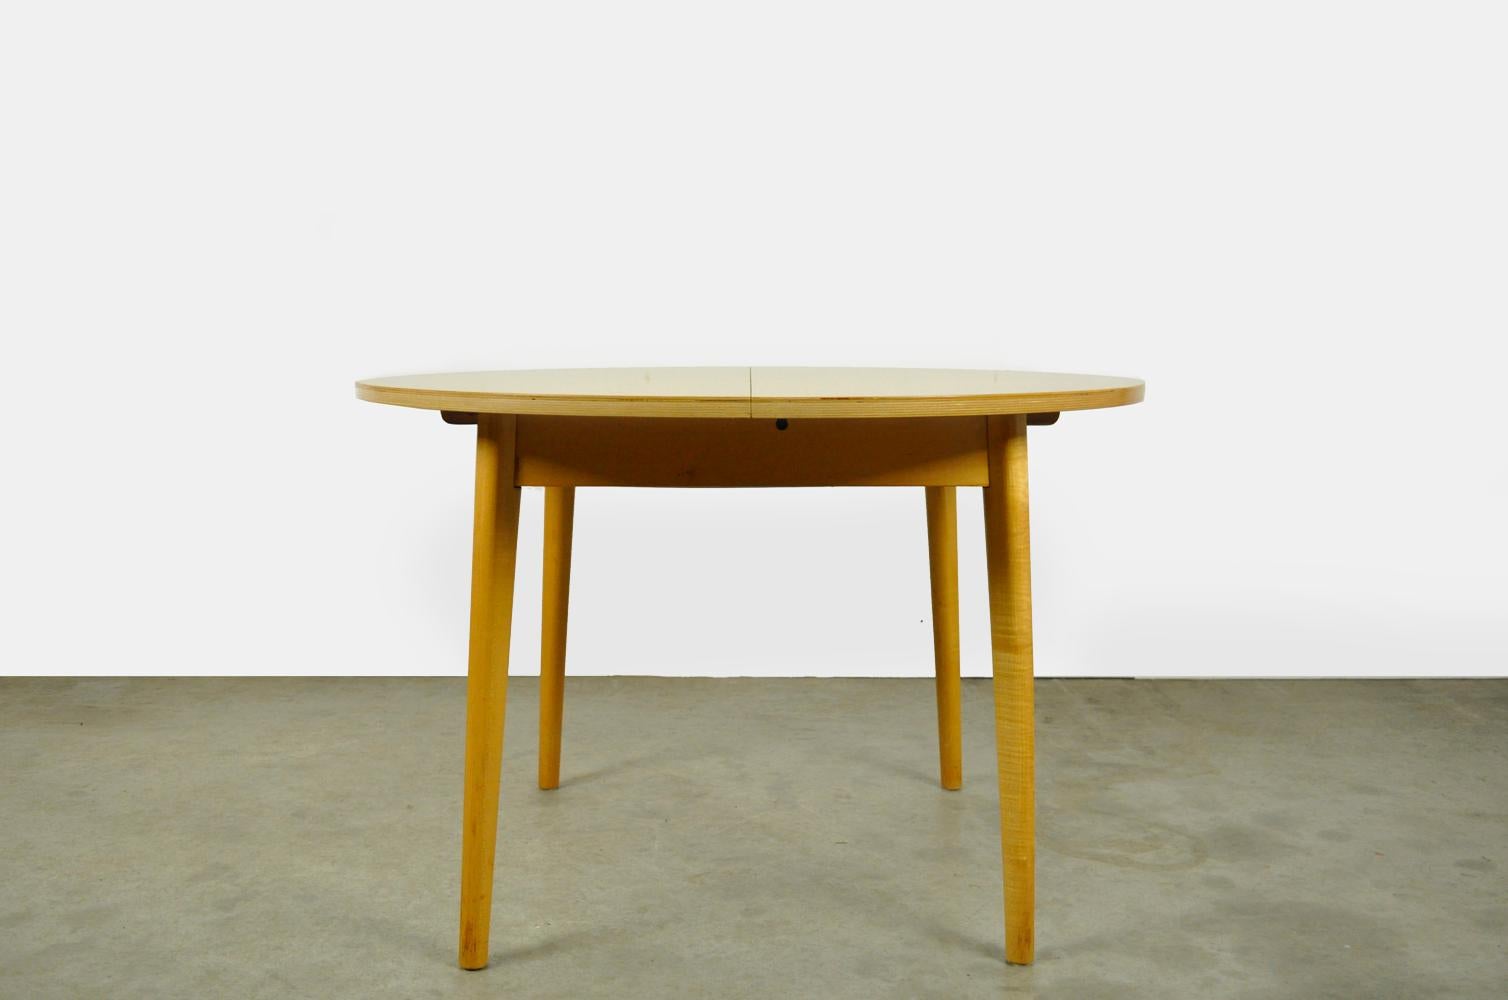 The table has a plywood top with a birch top layer. The top rests on a birch frame standing on 4 solid wooden legs. The extension of the table hangs under the table and can be folded out on hinges. No brand or designer is known to us, but it has the